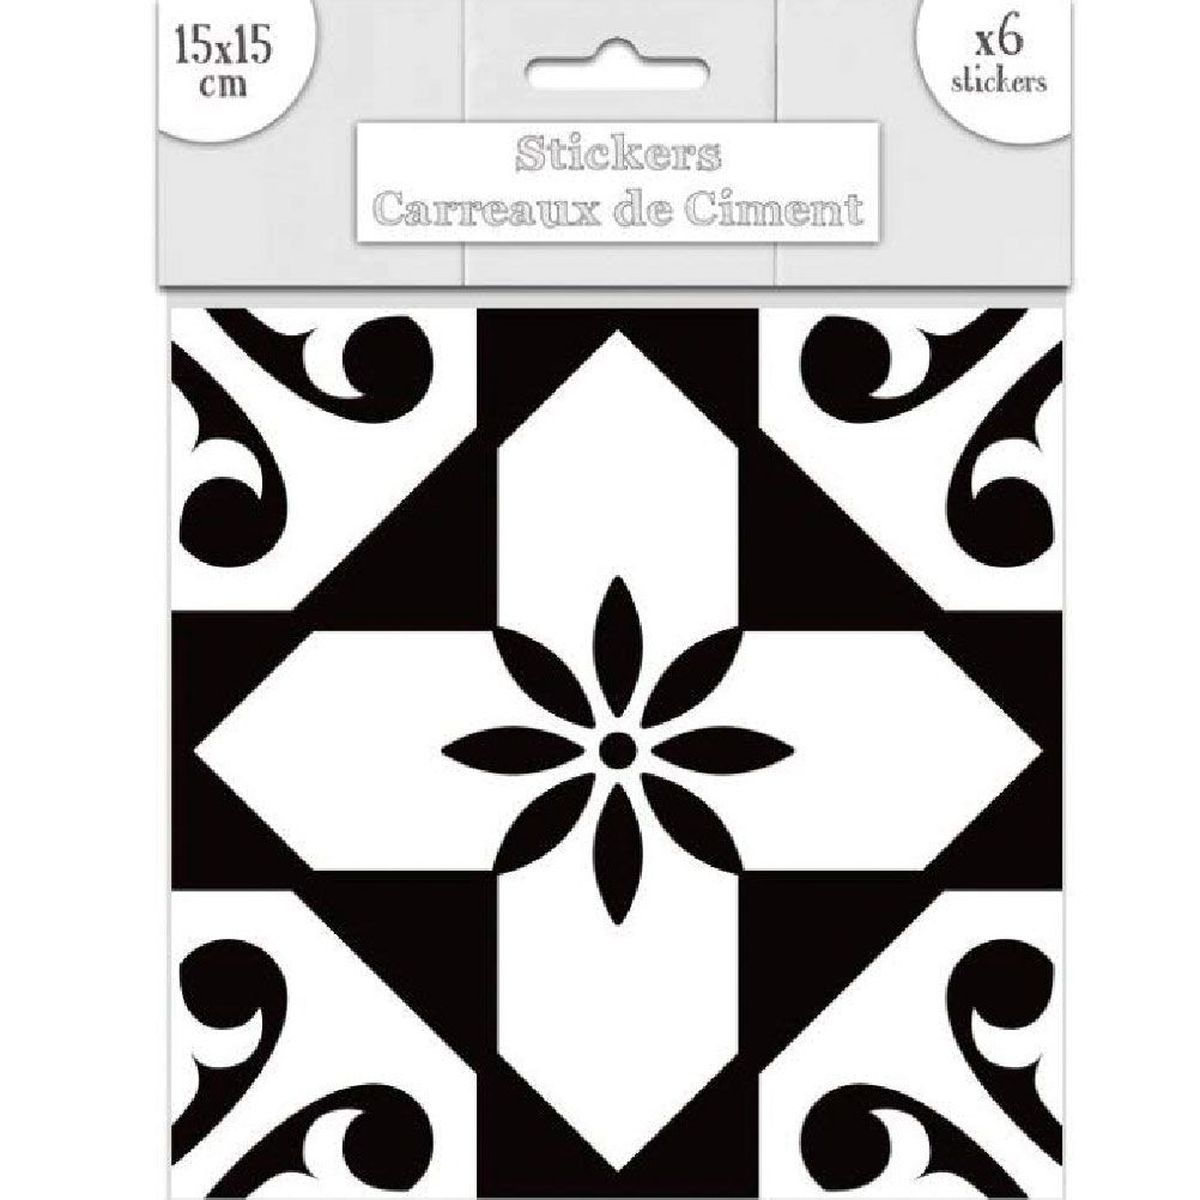 6 Cement tile stickers 15 x 15 cm - Black and White